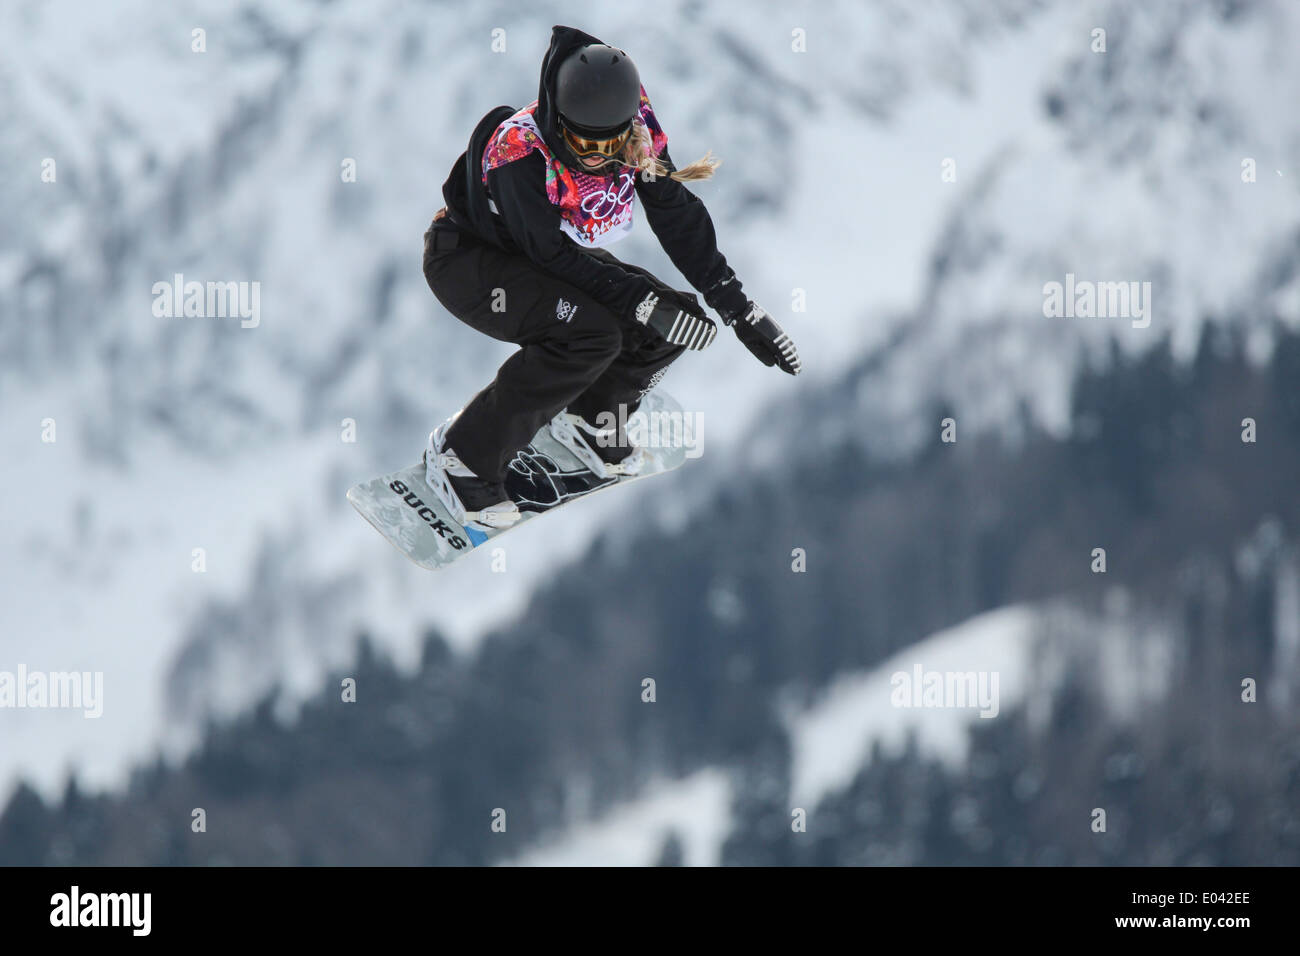 Rebecca Torr (NZL) competing in Women's Snowboard Slopestyle at the Olympic Winter Games, Sochi 2014 Stock Photo